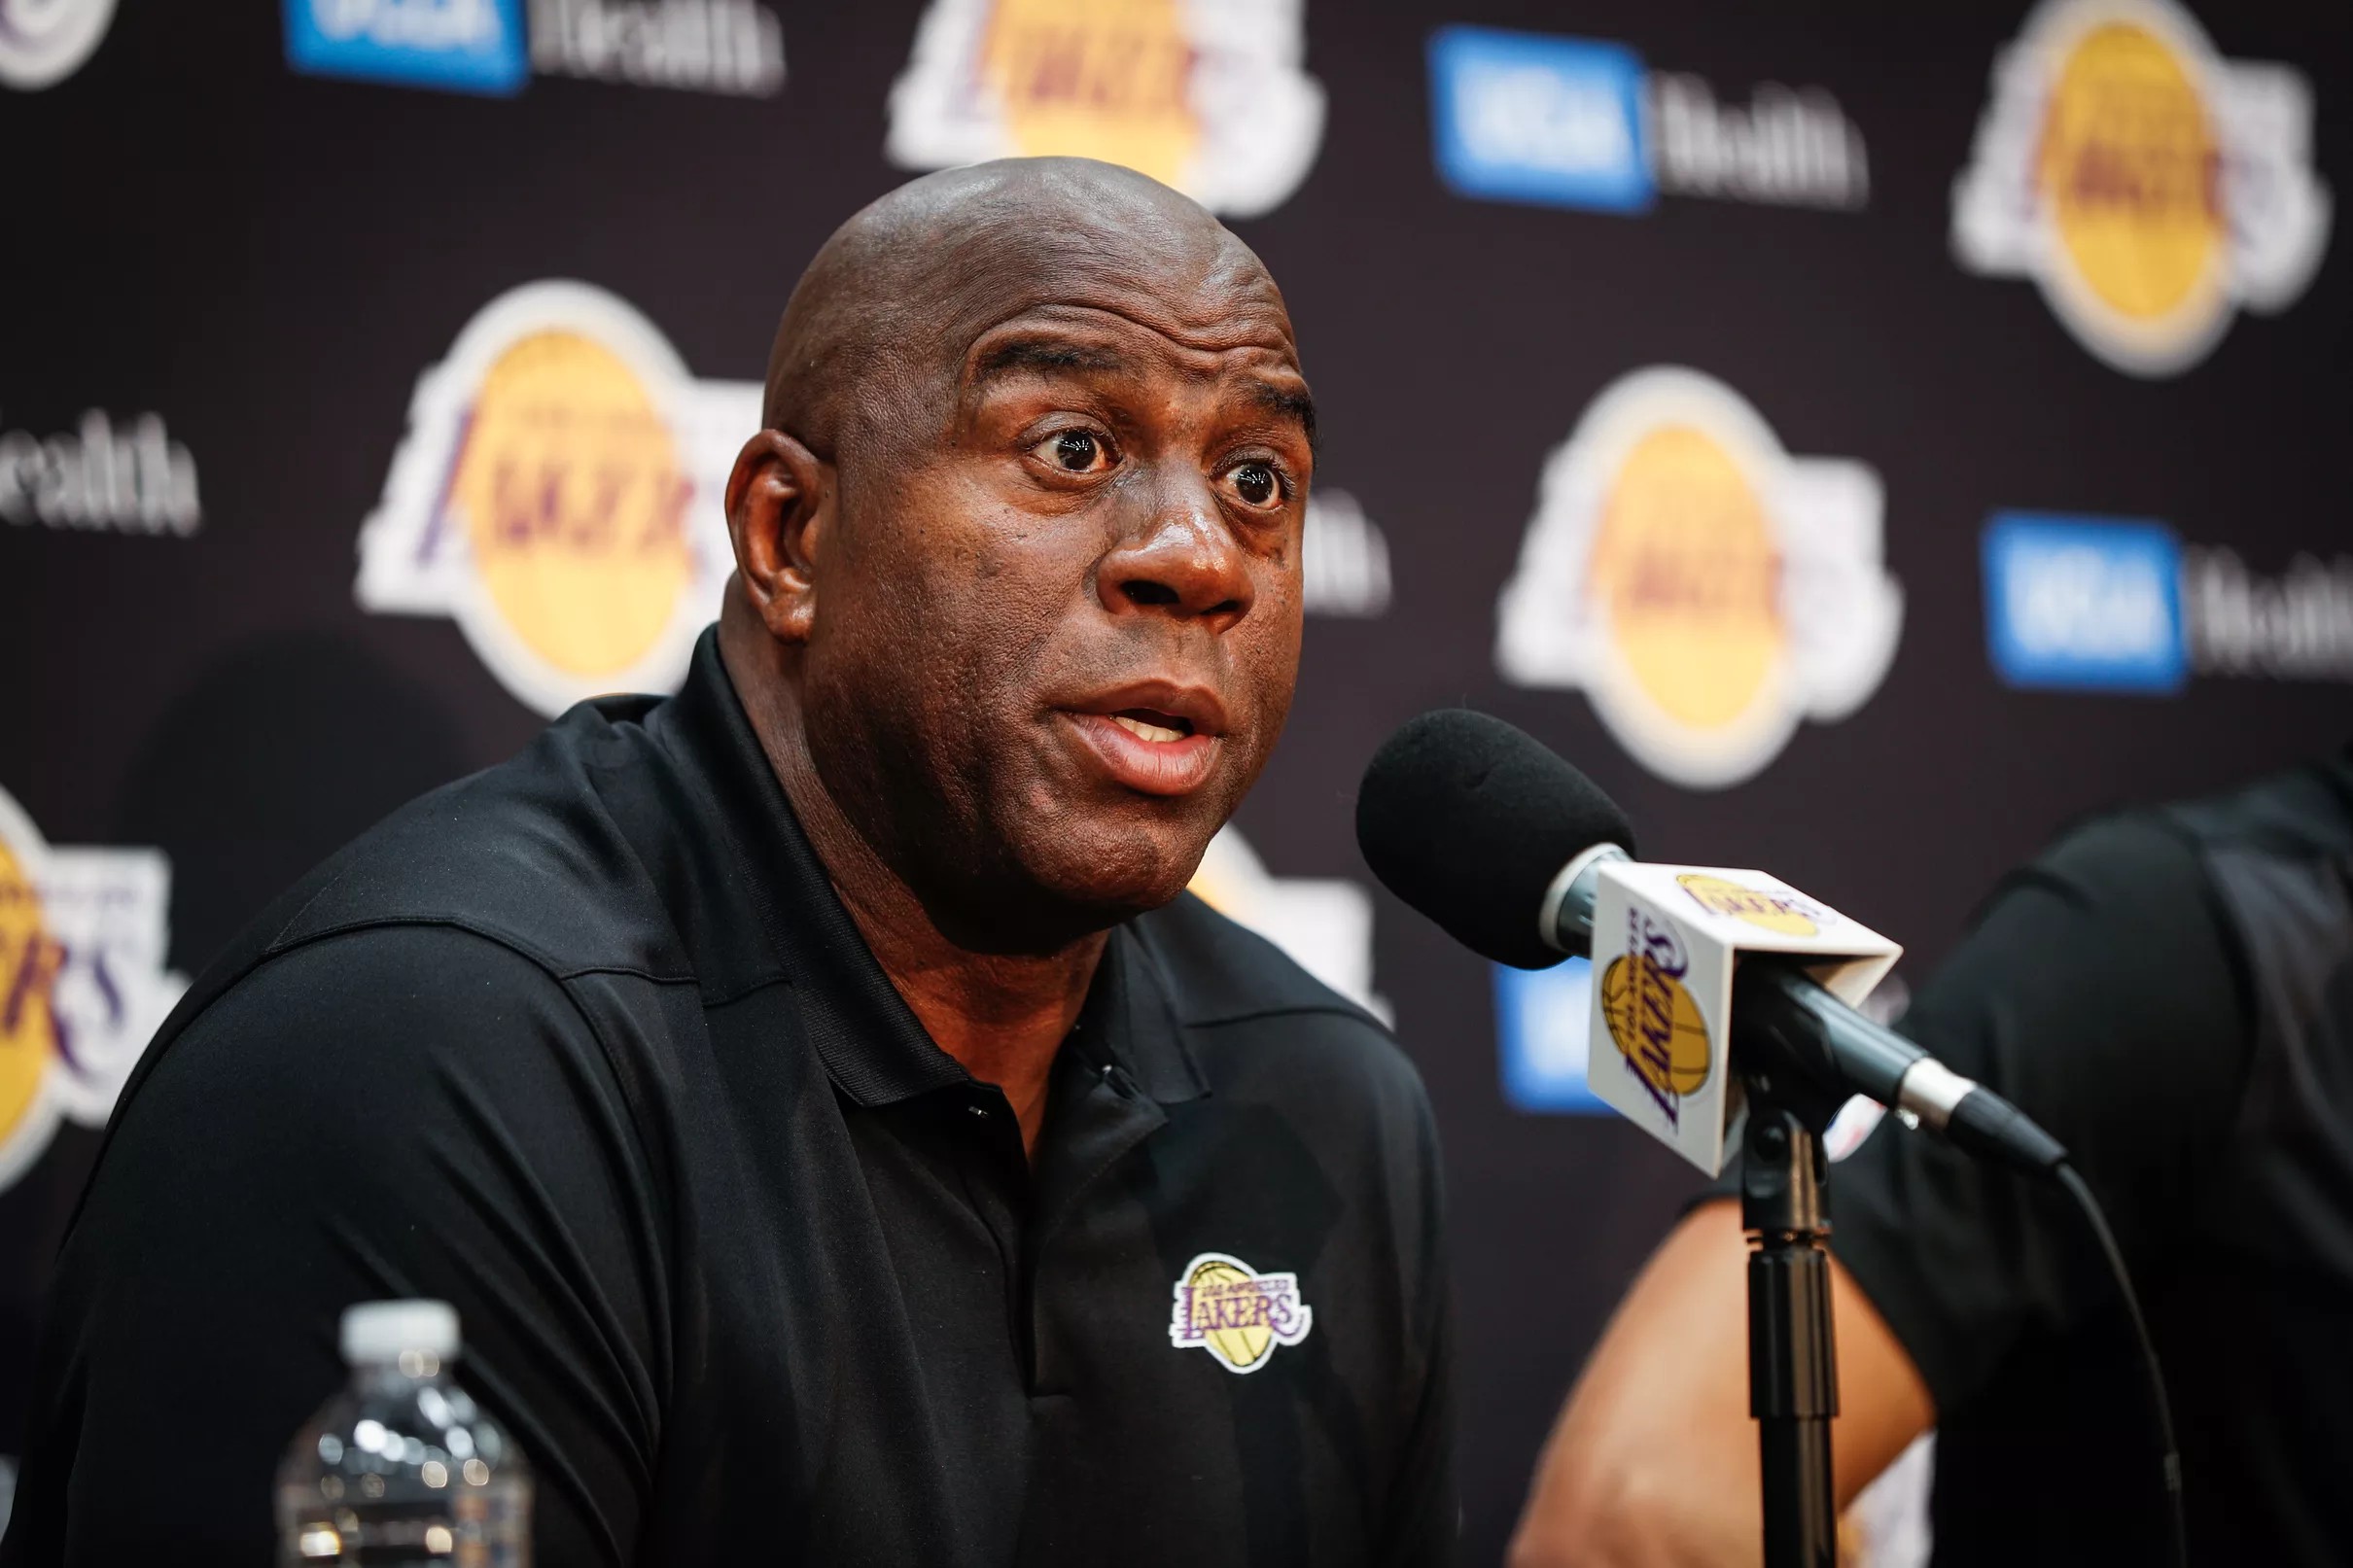 The NBA is investigating whether Magic Johnson and the Lakers tampered